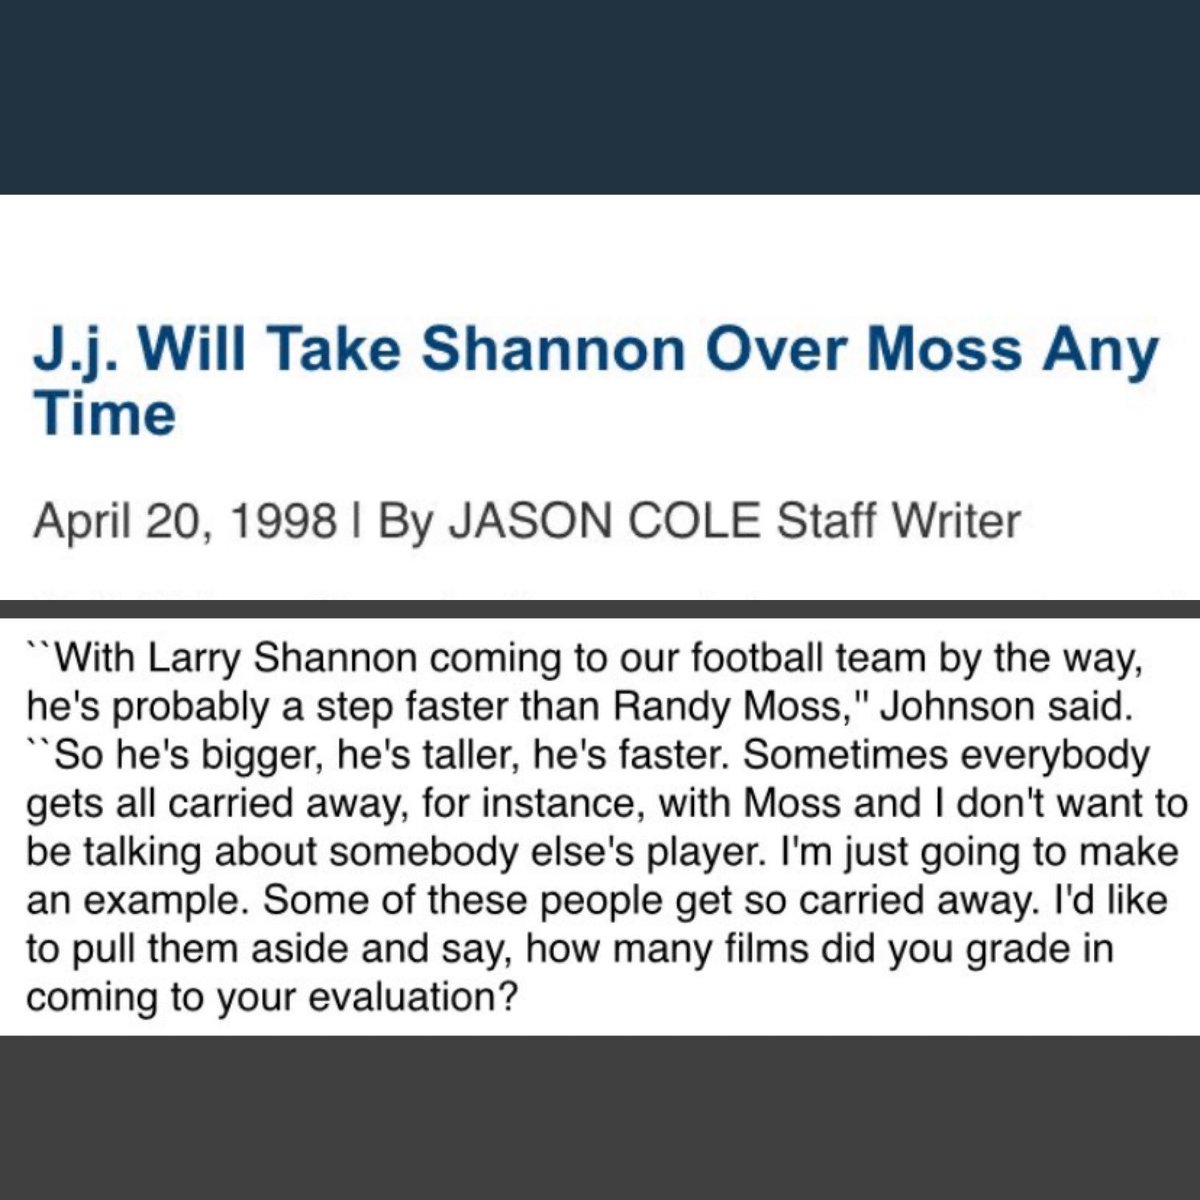 Randy Moss (1998) (Tweet 3/3)Dolphins HC Jimmy Johnson, who traded the 19th pick, tried to justify passing on Moss, by gassing up his 3rd round pick: WR Larry Shannon.Jay Mariotti was ecstatic the Bears picked Curtis Enis over Randy Moss & admitted he had “Enis Envy.”